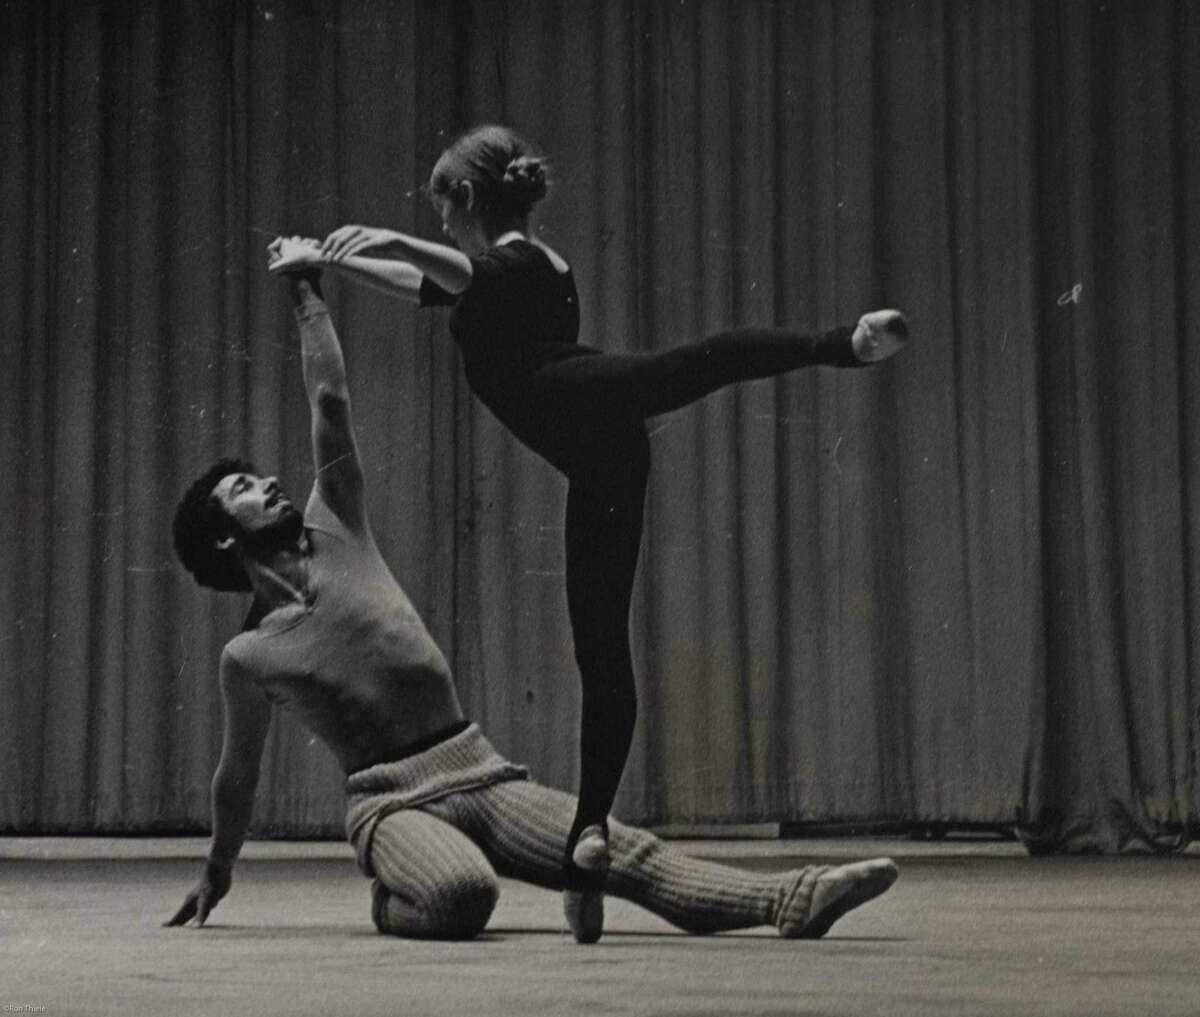 Ronn Guidi in his Oakland Ballet Studio in a photo that likely dates to the late 1970s or early 1980s.